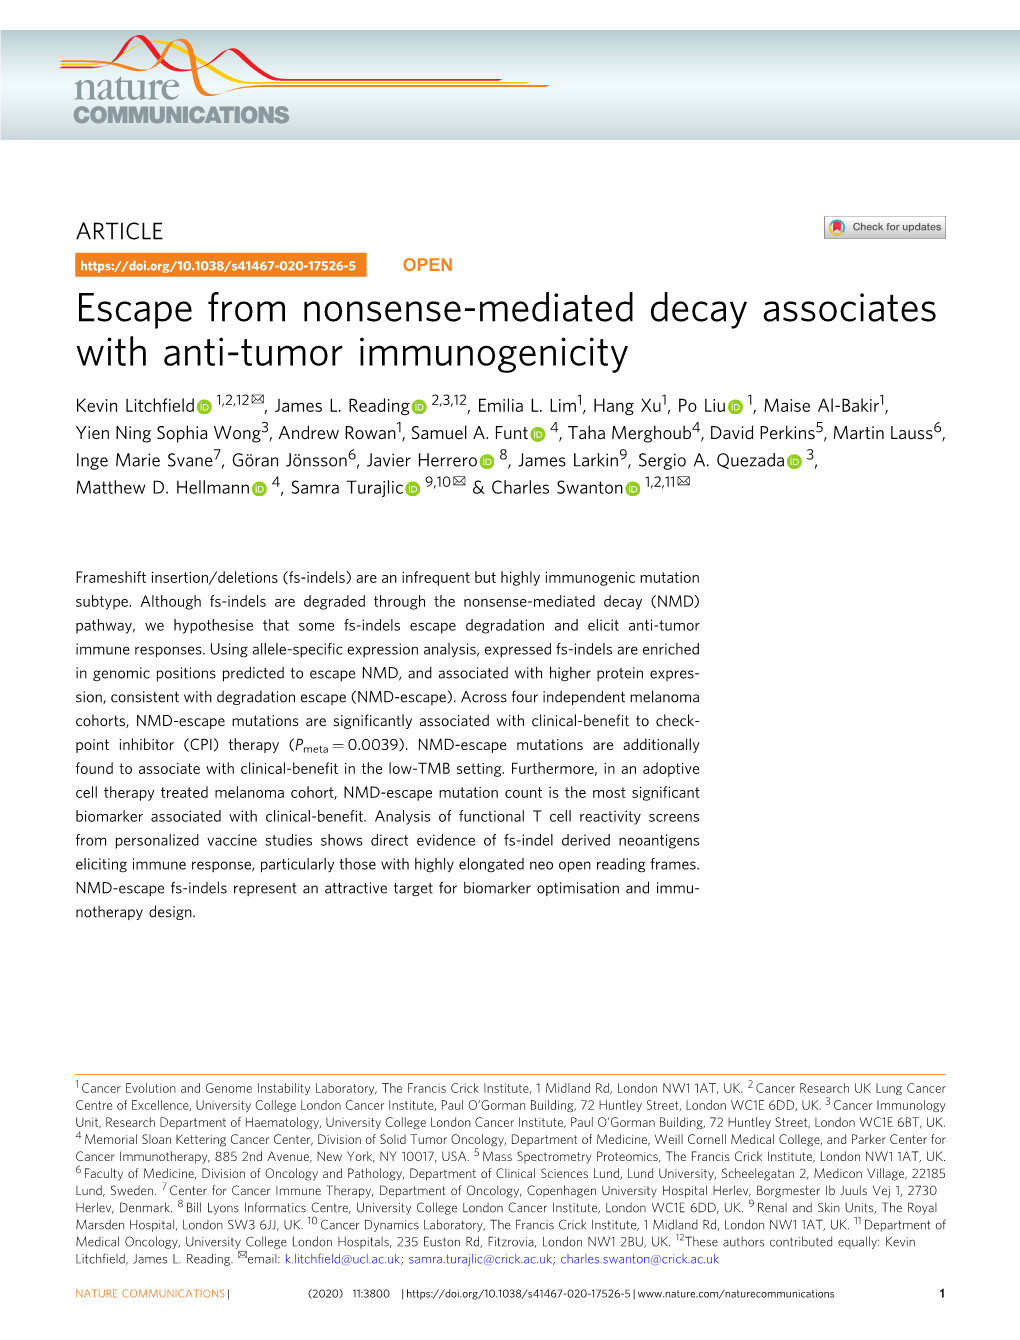 Escape from Nonsense-Mediated Decay Associates with Anti-Tumor Immunogenicity ✉ Kevin Litchﬁeld 1,2,12 , James L